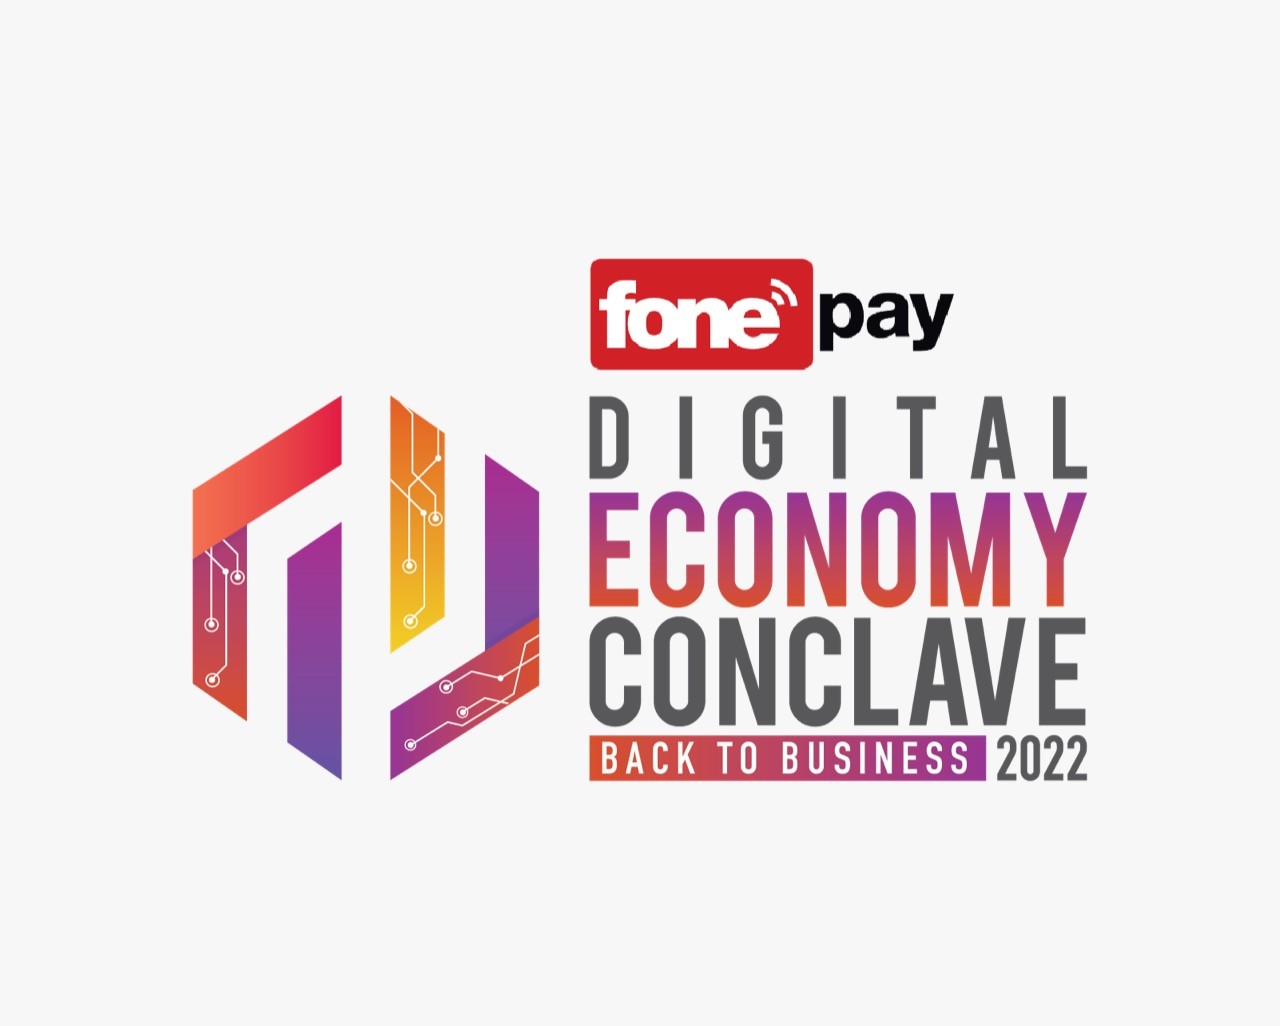 Fonepay Digital Conclave Second Edition to be Held on June 3, 2022